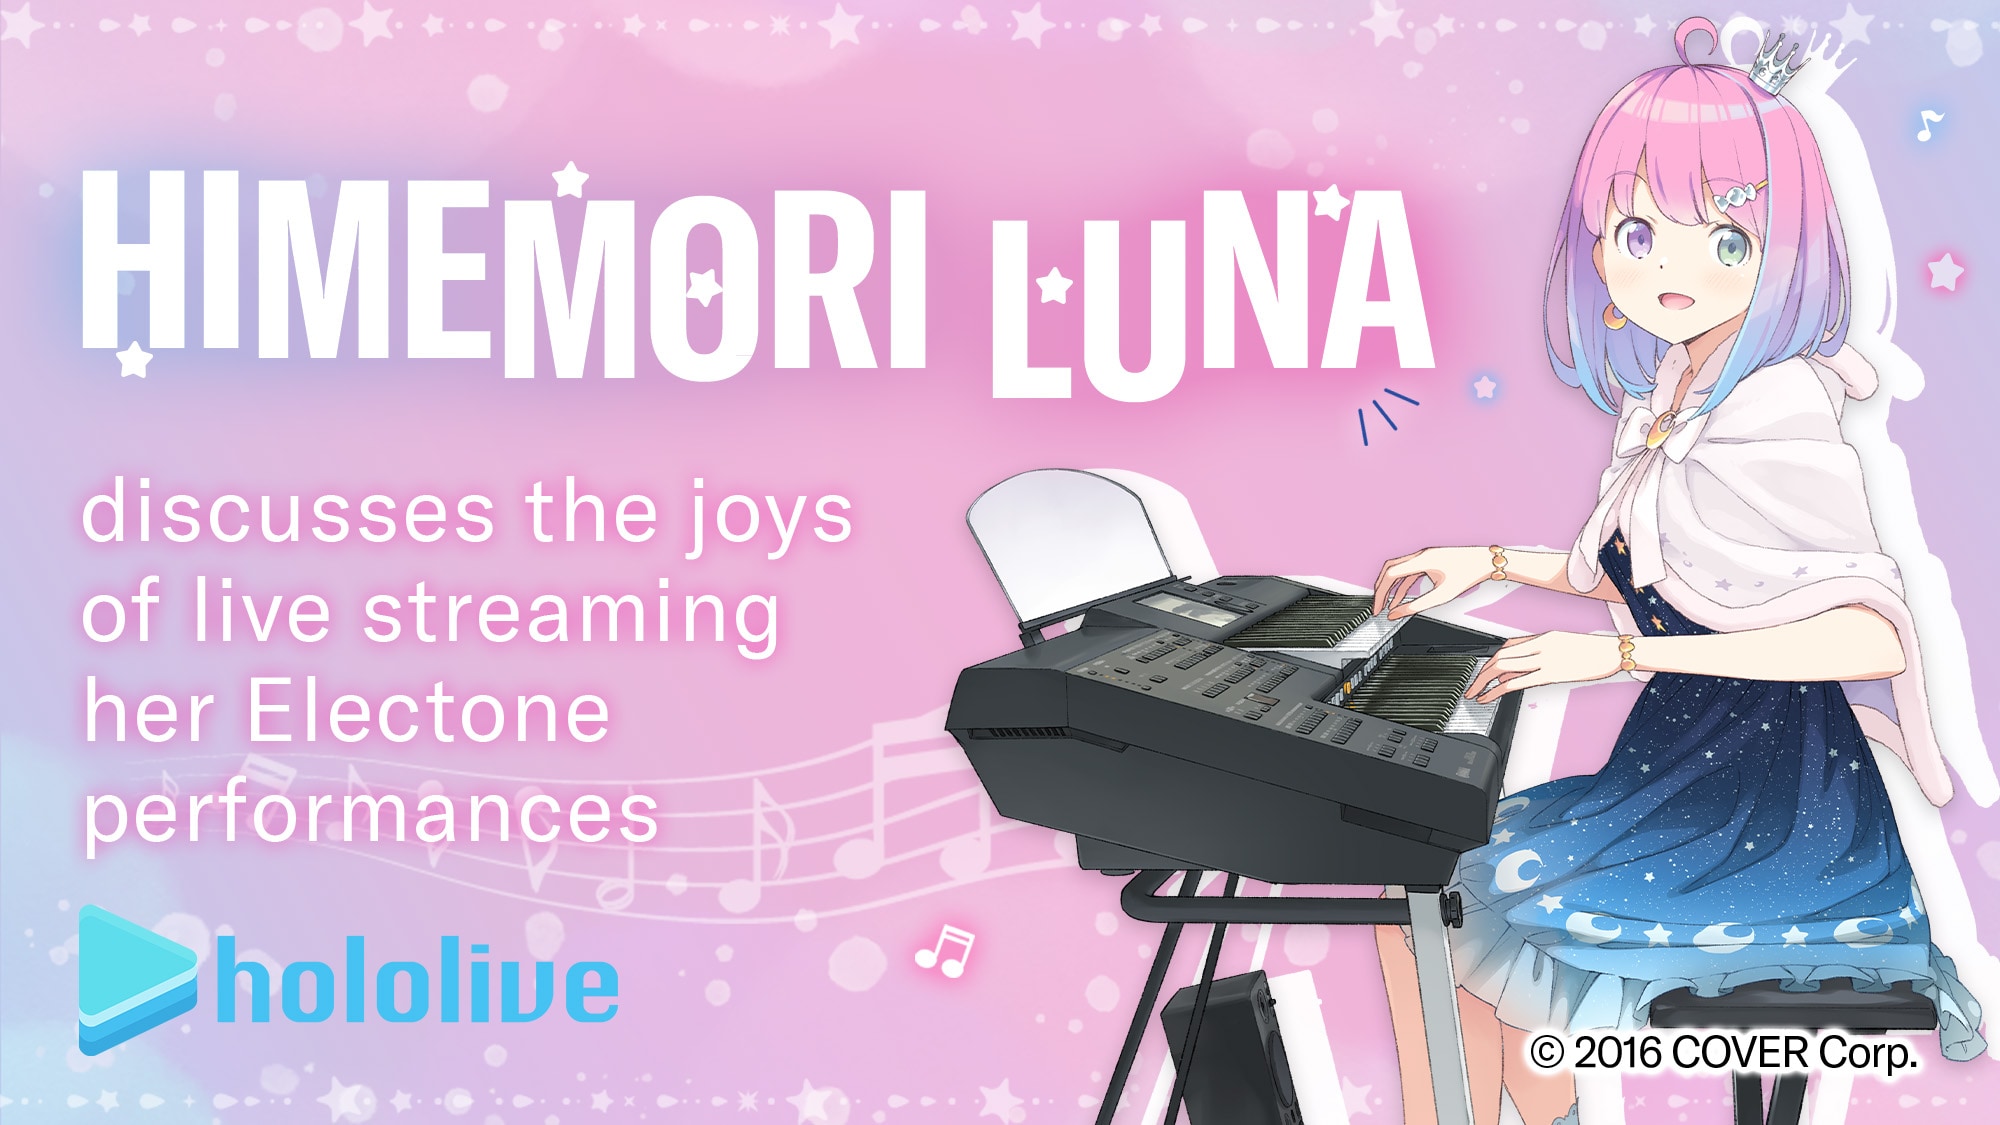 HIMEMORI LUNA - discusses the joys of live streaming her Electone performances